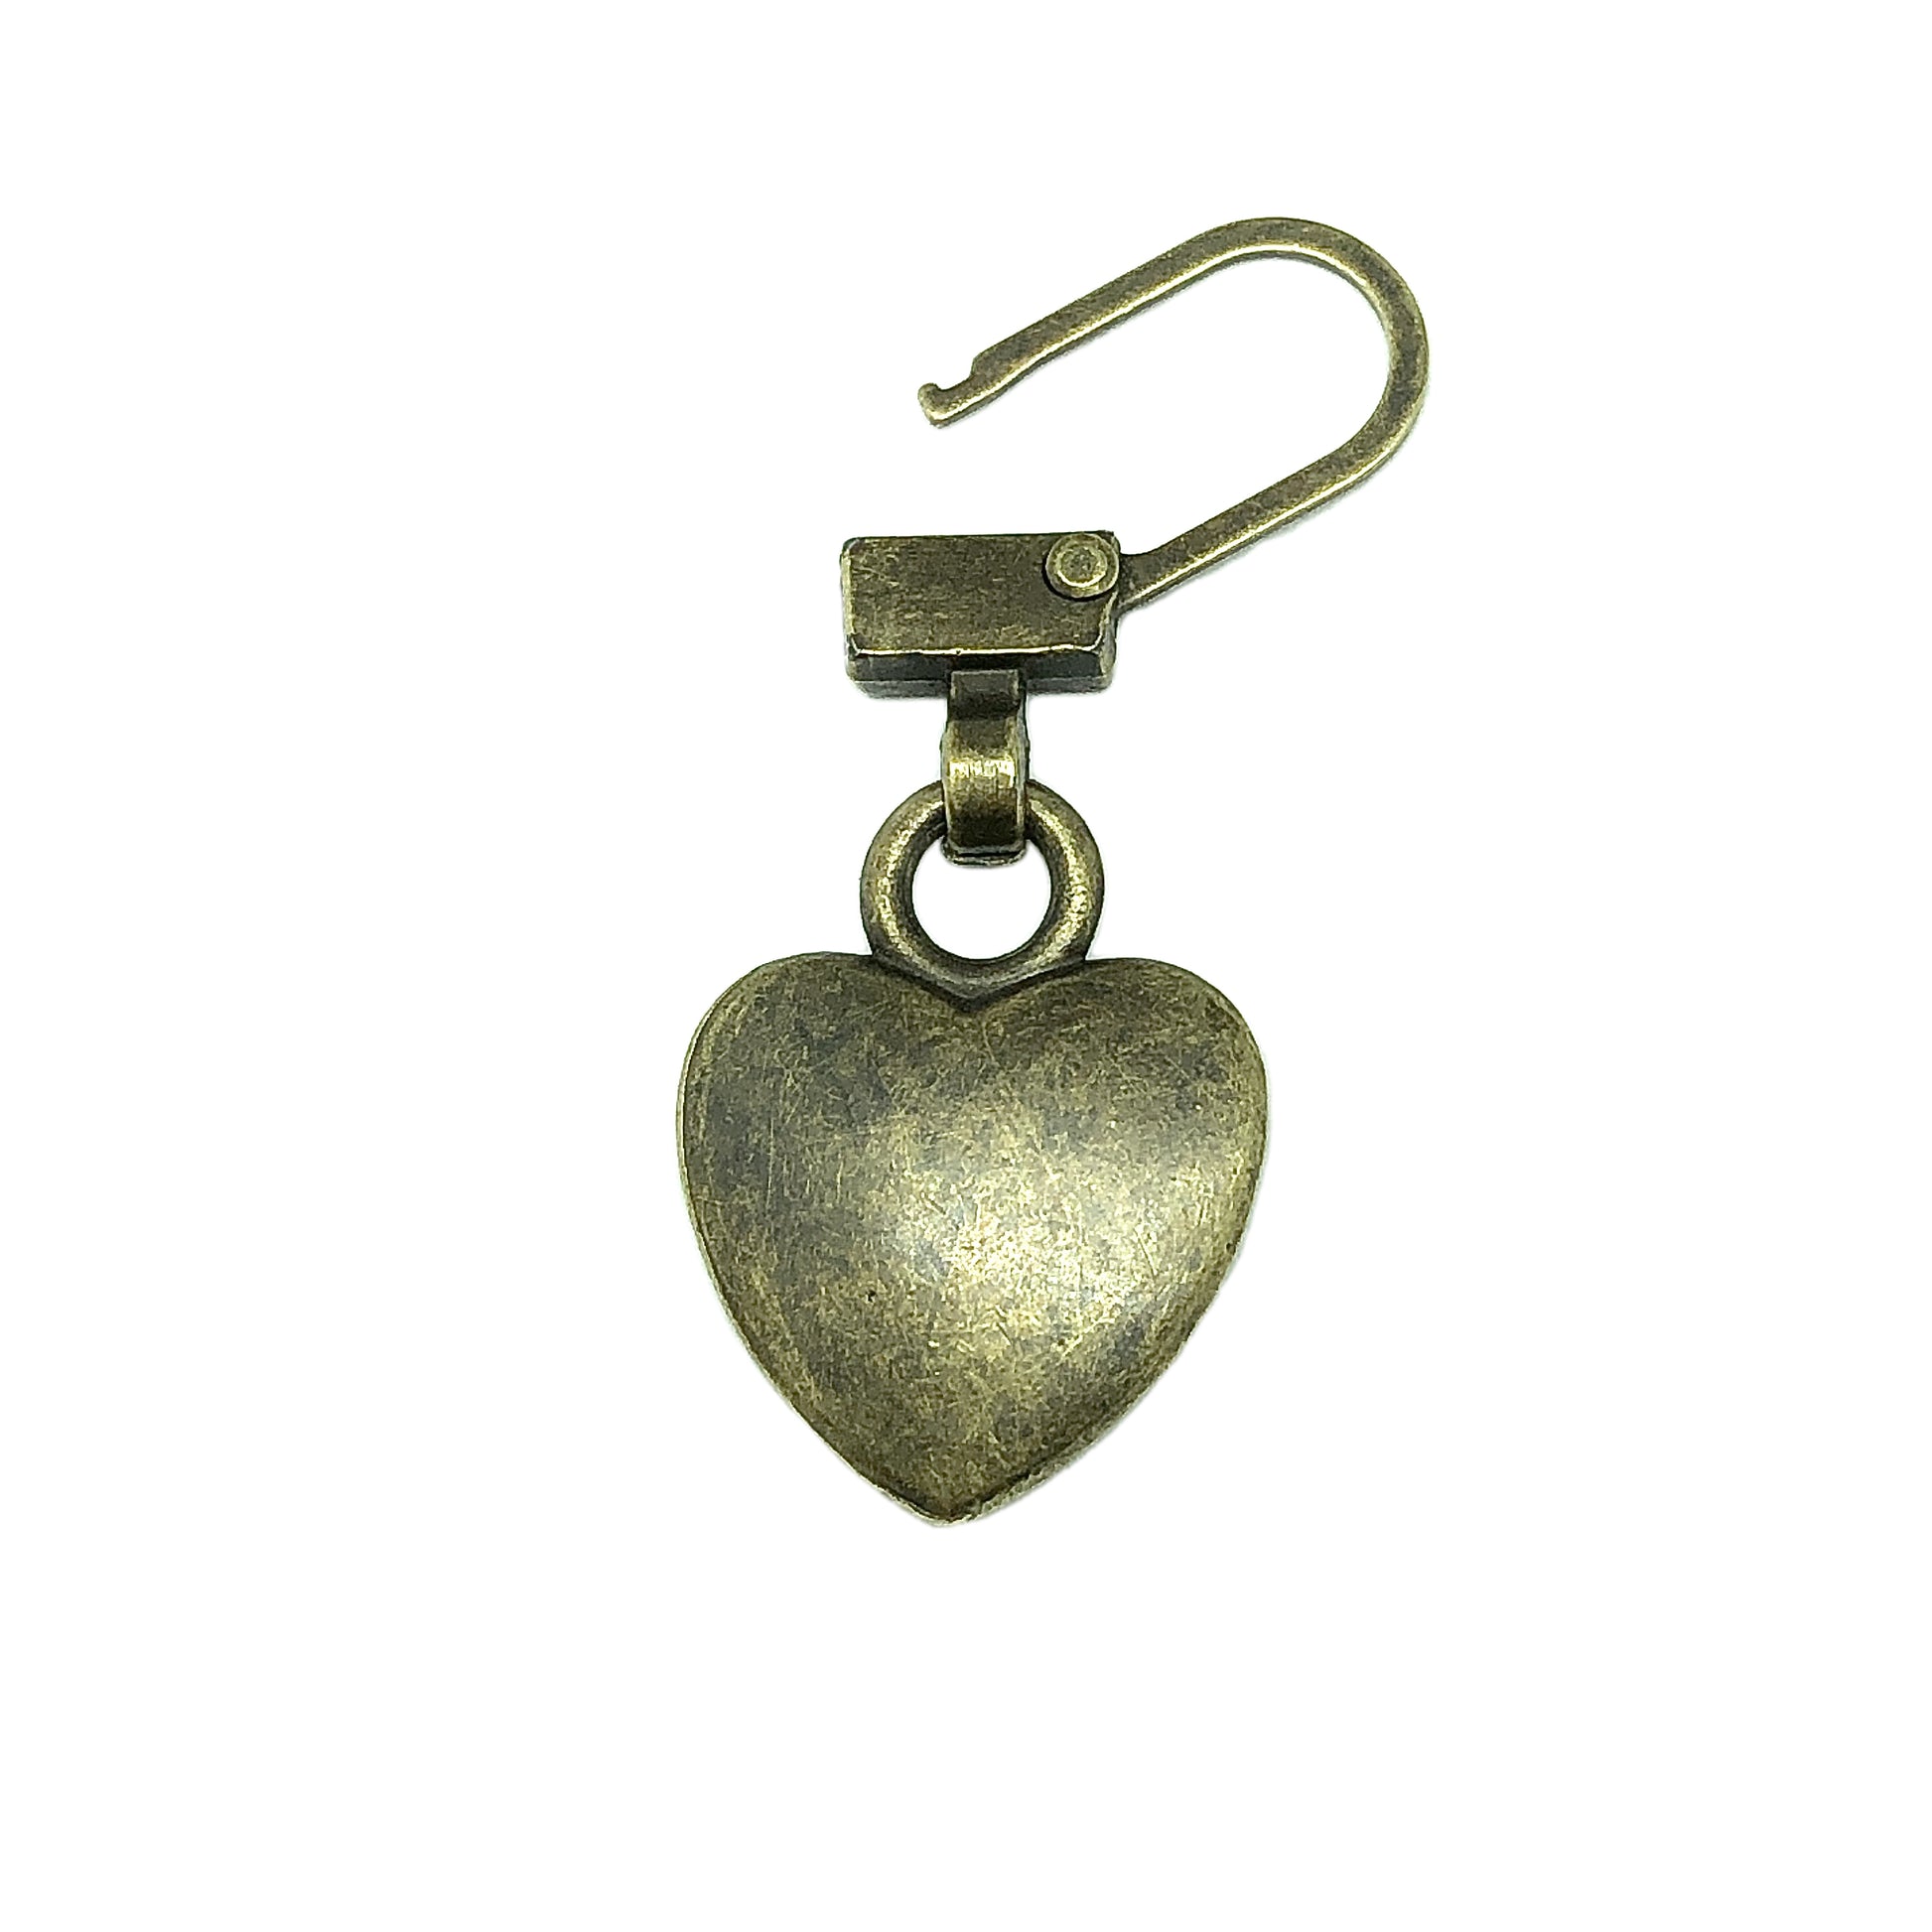 Zipper Pull Repair Charm Heart Rustic Bronze - for Repair or Decorate  Shoes, Purses, Keychains + More